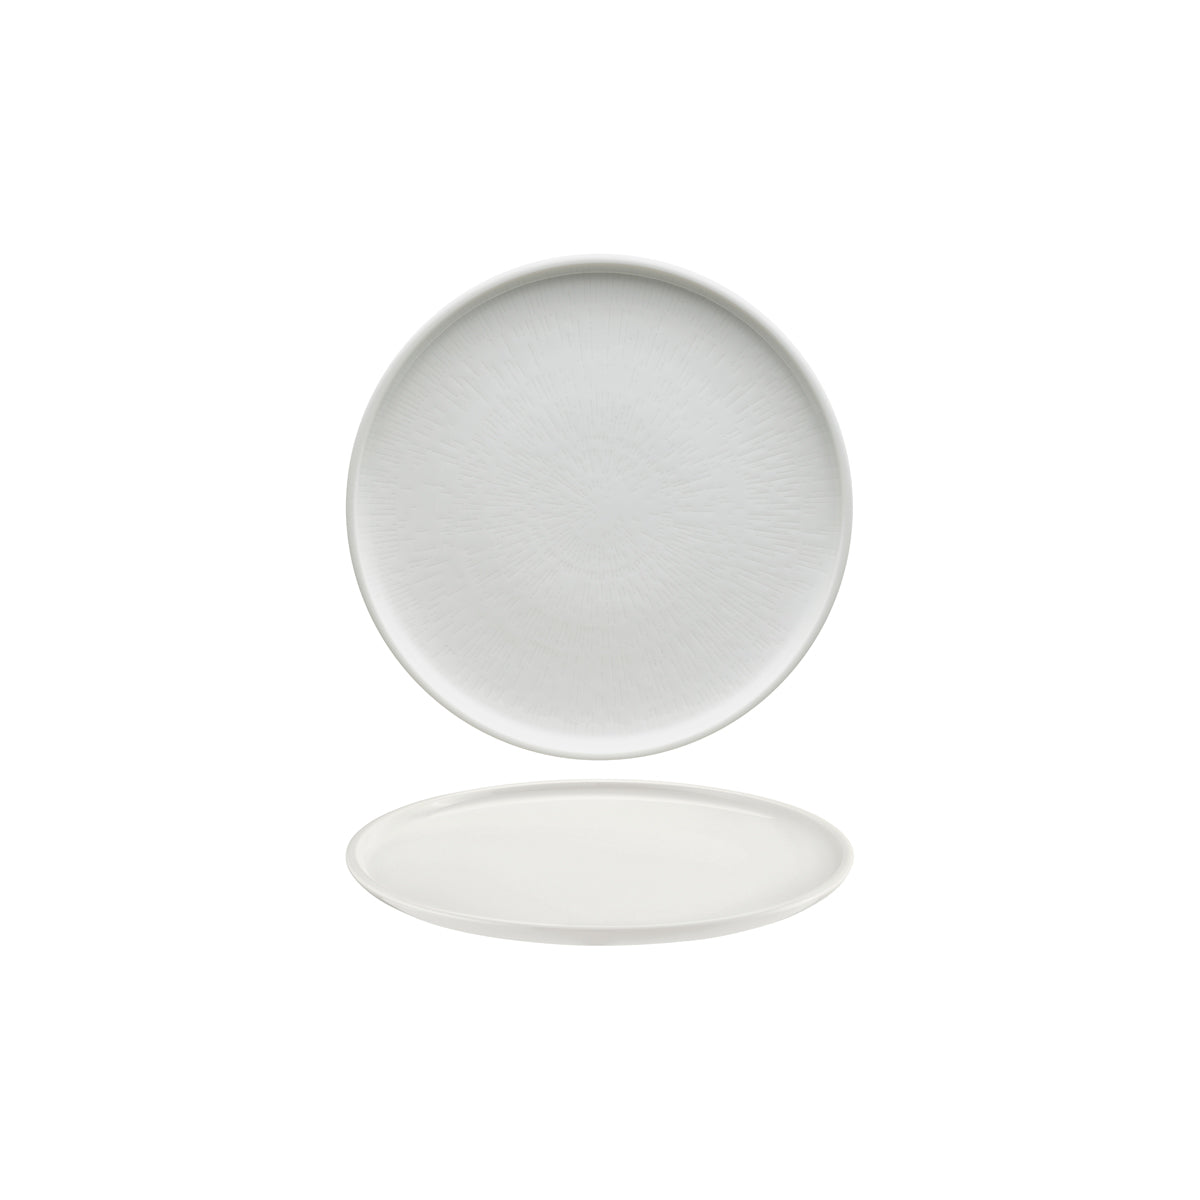 SH9251271 Schonwald Shiro Round Flat Coupe Plate Relief Design 210mm Tomkin Australia Hospitality Supplies